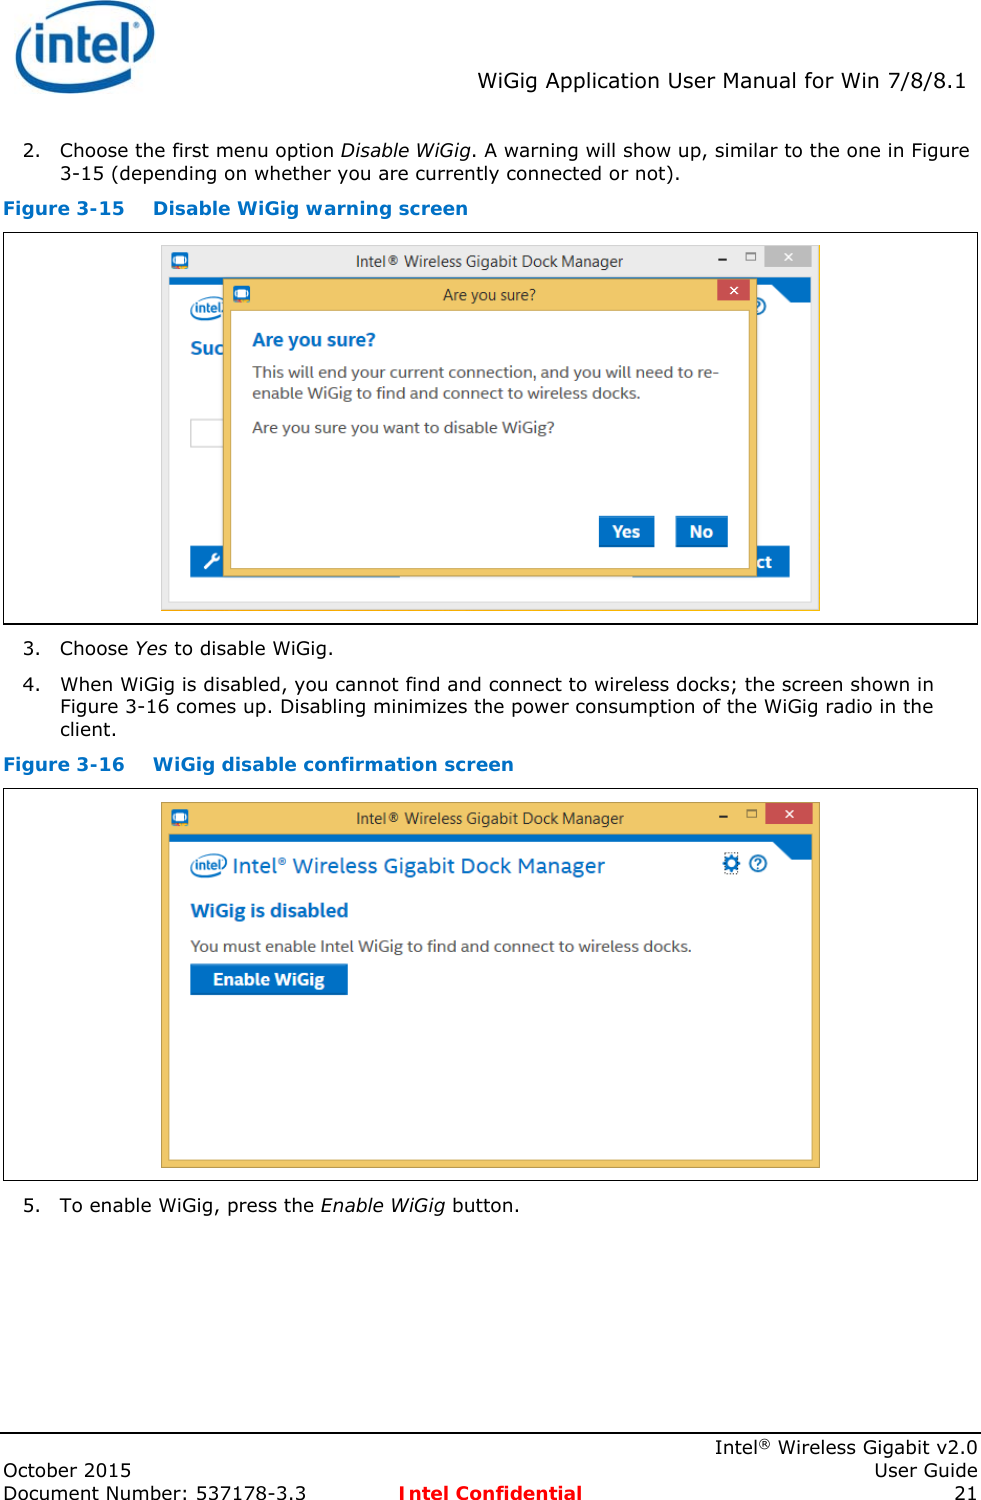  WiGig Application User Manual for Win 7/8/8.1    Intel® Wireless Gigabit v2.0 October 2015    User Guide Document Number: 537178-3.3  Intel Confidential 21 2. Choose the first menu option Disable WiGig. A warning will show up, similar to the one in Figure 3-15 (depending on whether you are currently connected or not). Figure 3-15  Disable WiGig warning screen  3. Choose Yes to disable WiGig. 4. When WiGig is disabled, you cannot find and connect to wireless docks; the screen shown in Figure 3-16 comes up. Disabling minimizes the power consumption of the WiGig radio in the client. Figure 3-16  WiGig disable confirmation screen  5. To enable WiGig, press the Enable WiGig button. 